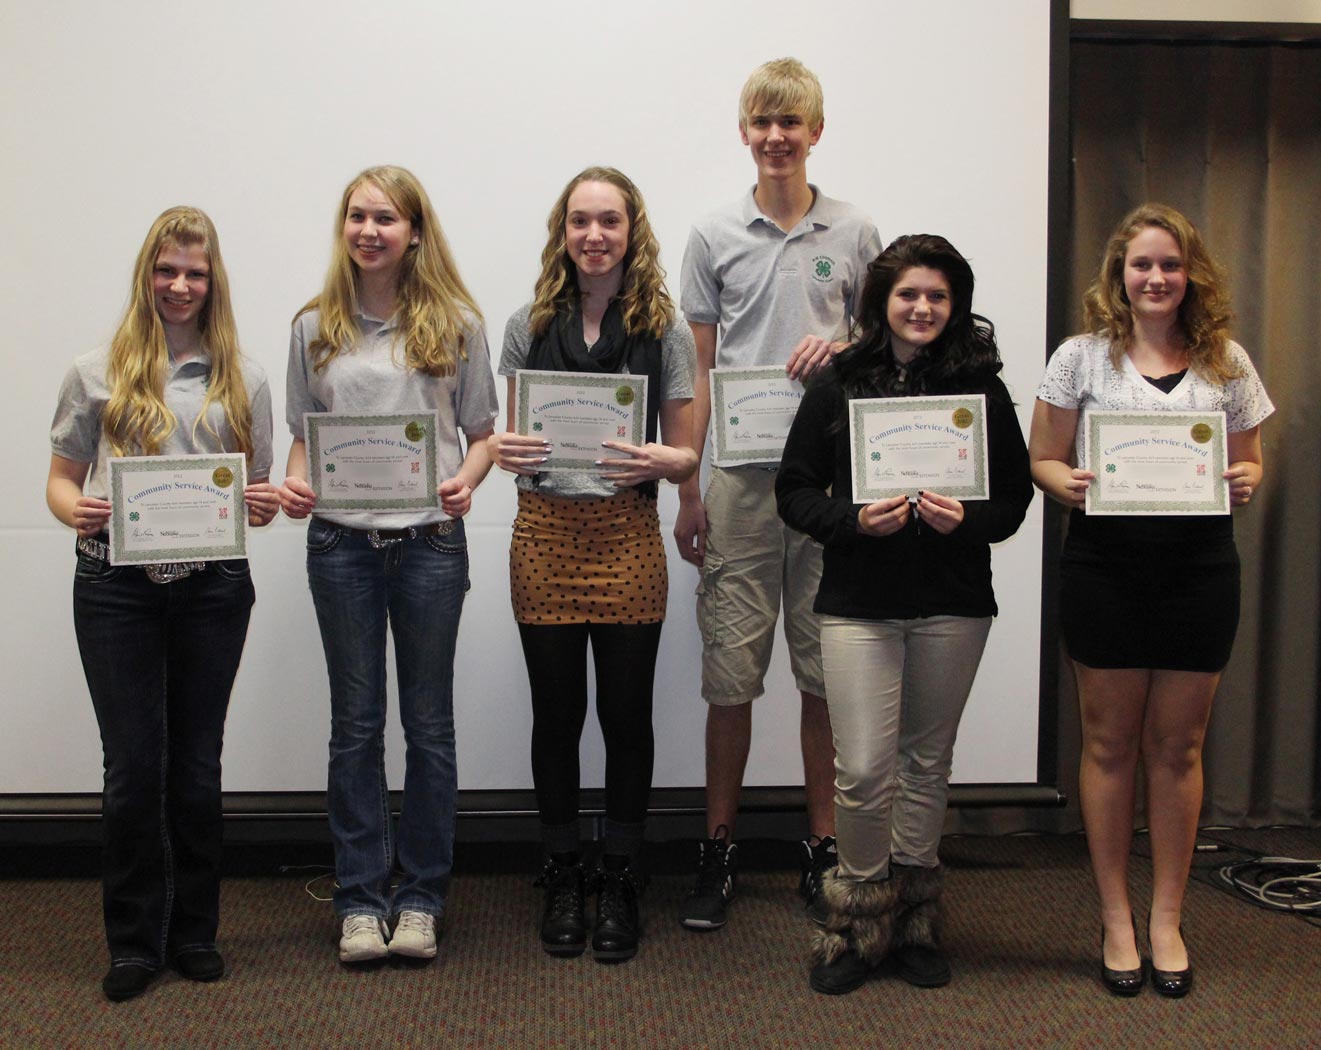 Achievement Night awards included Community Service Ages 14 & Over.